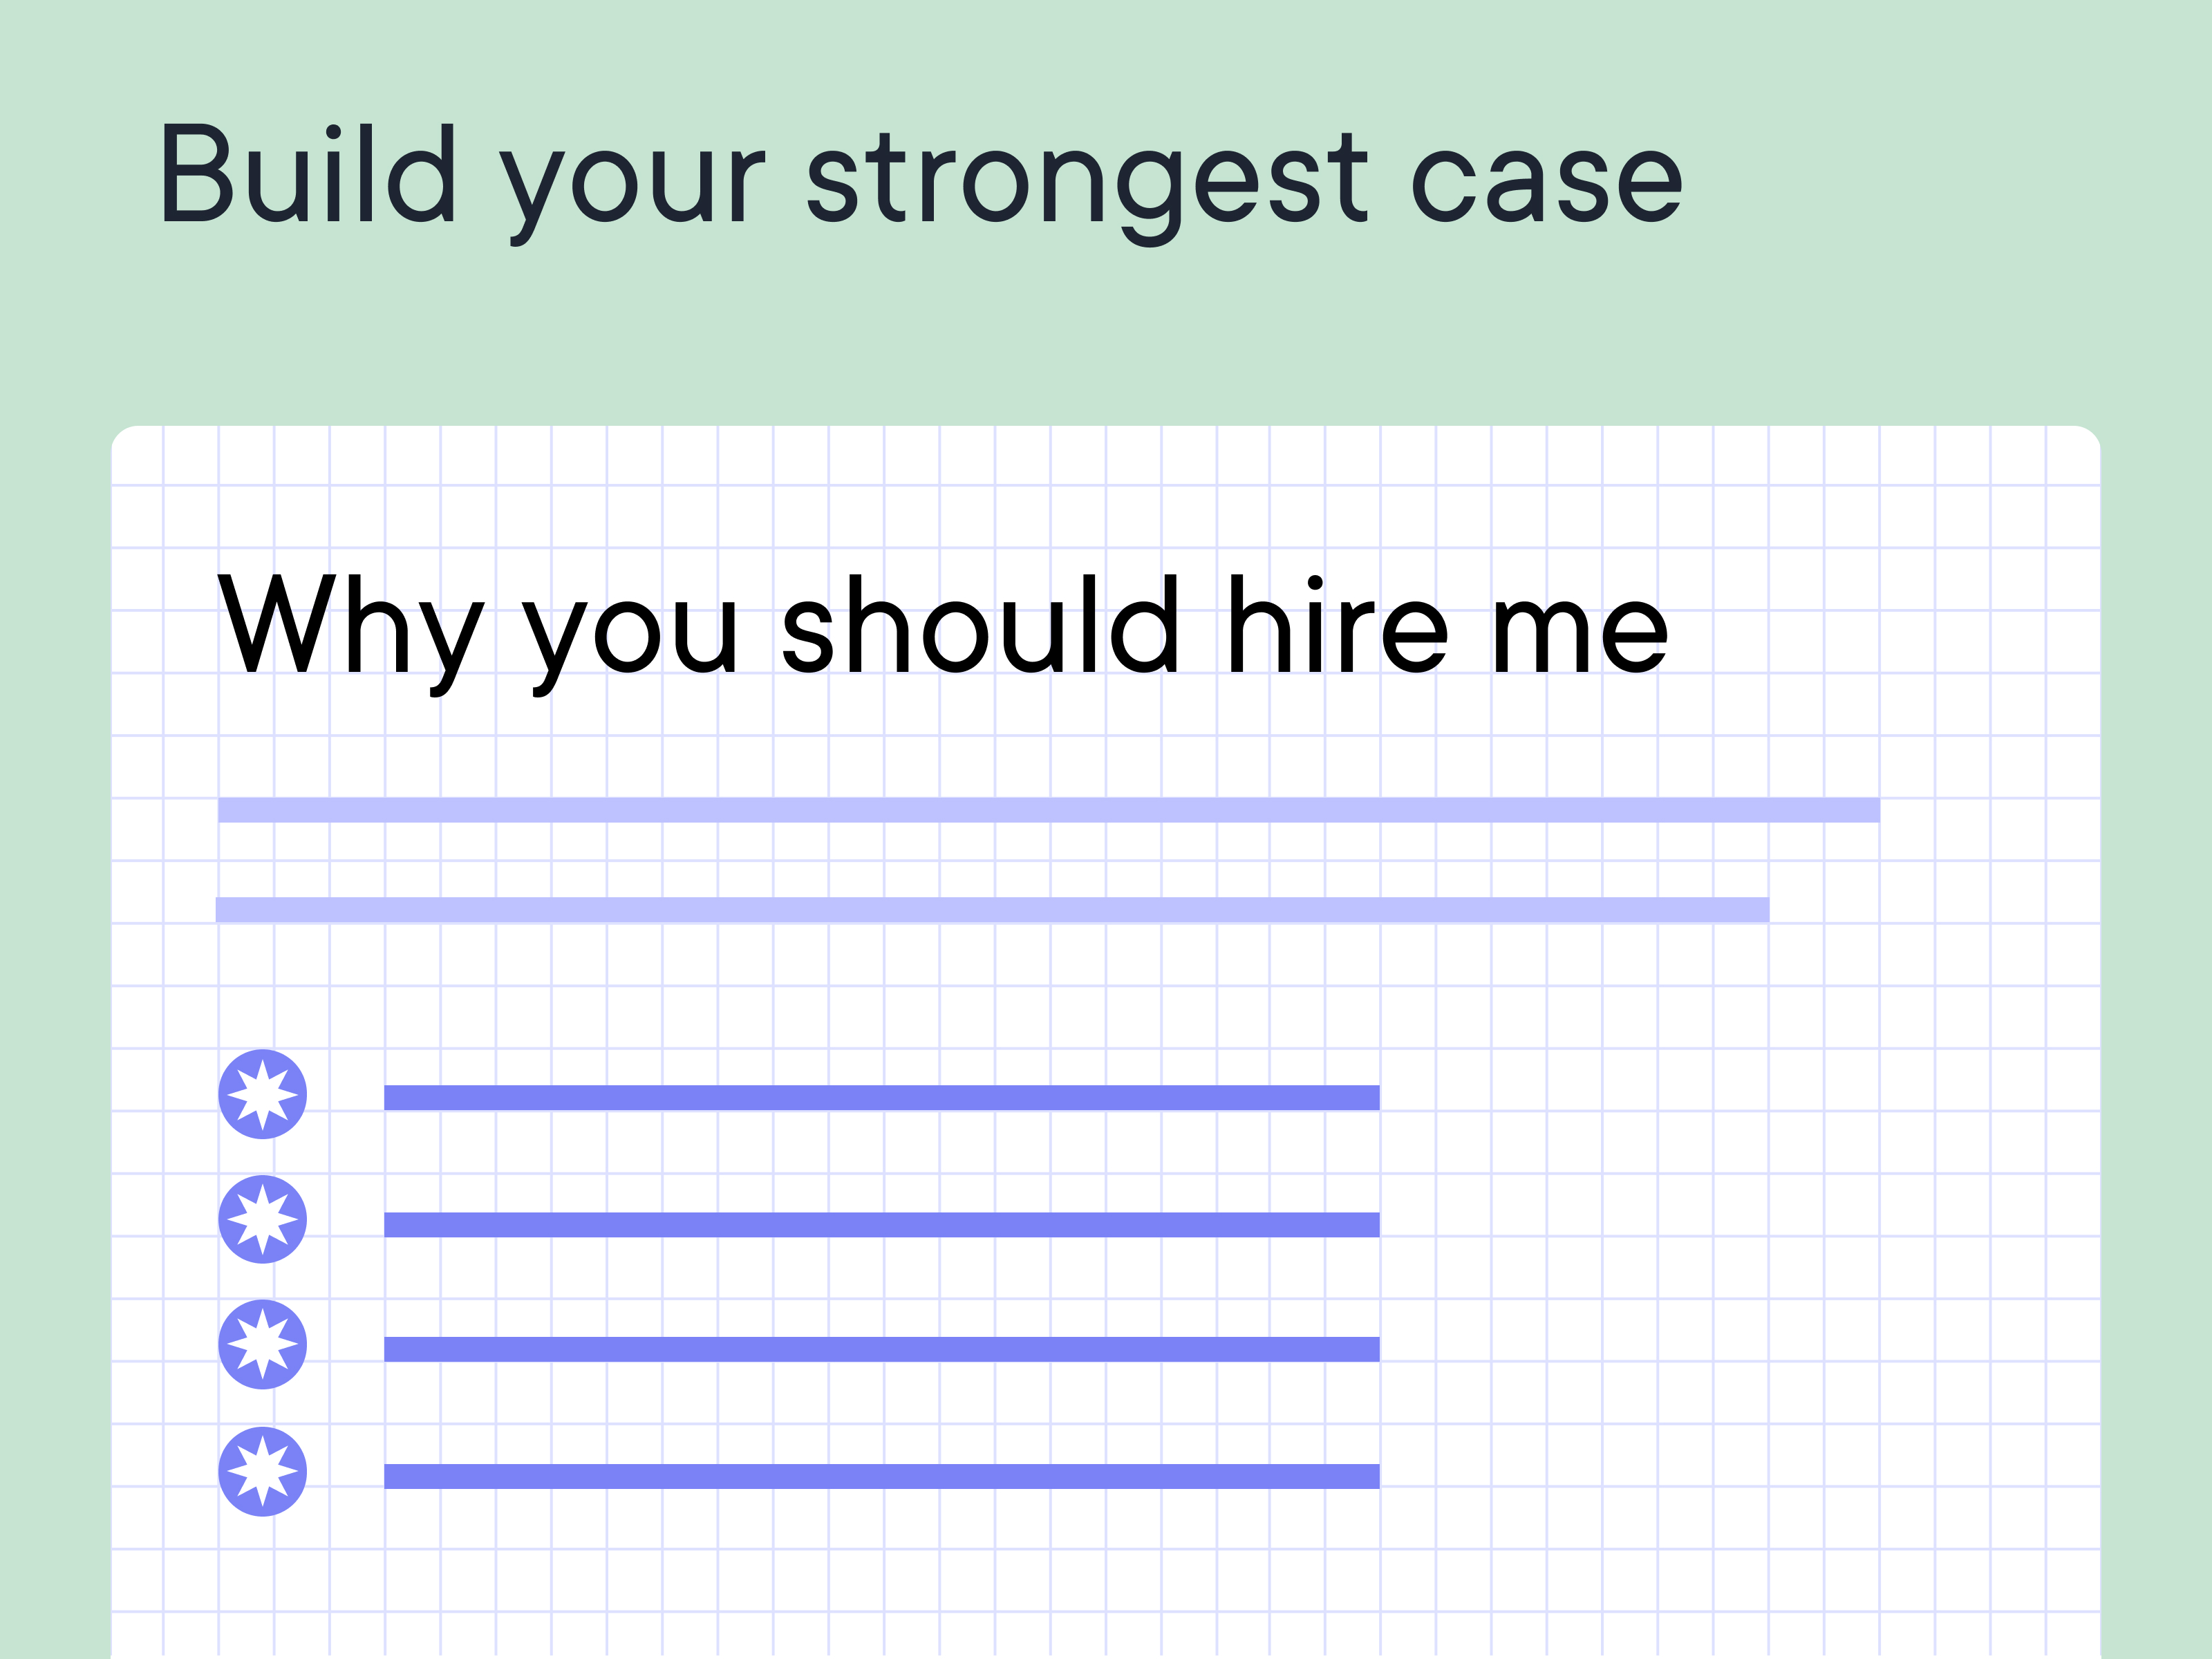 Build you strongest case - Why you should hire me